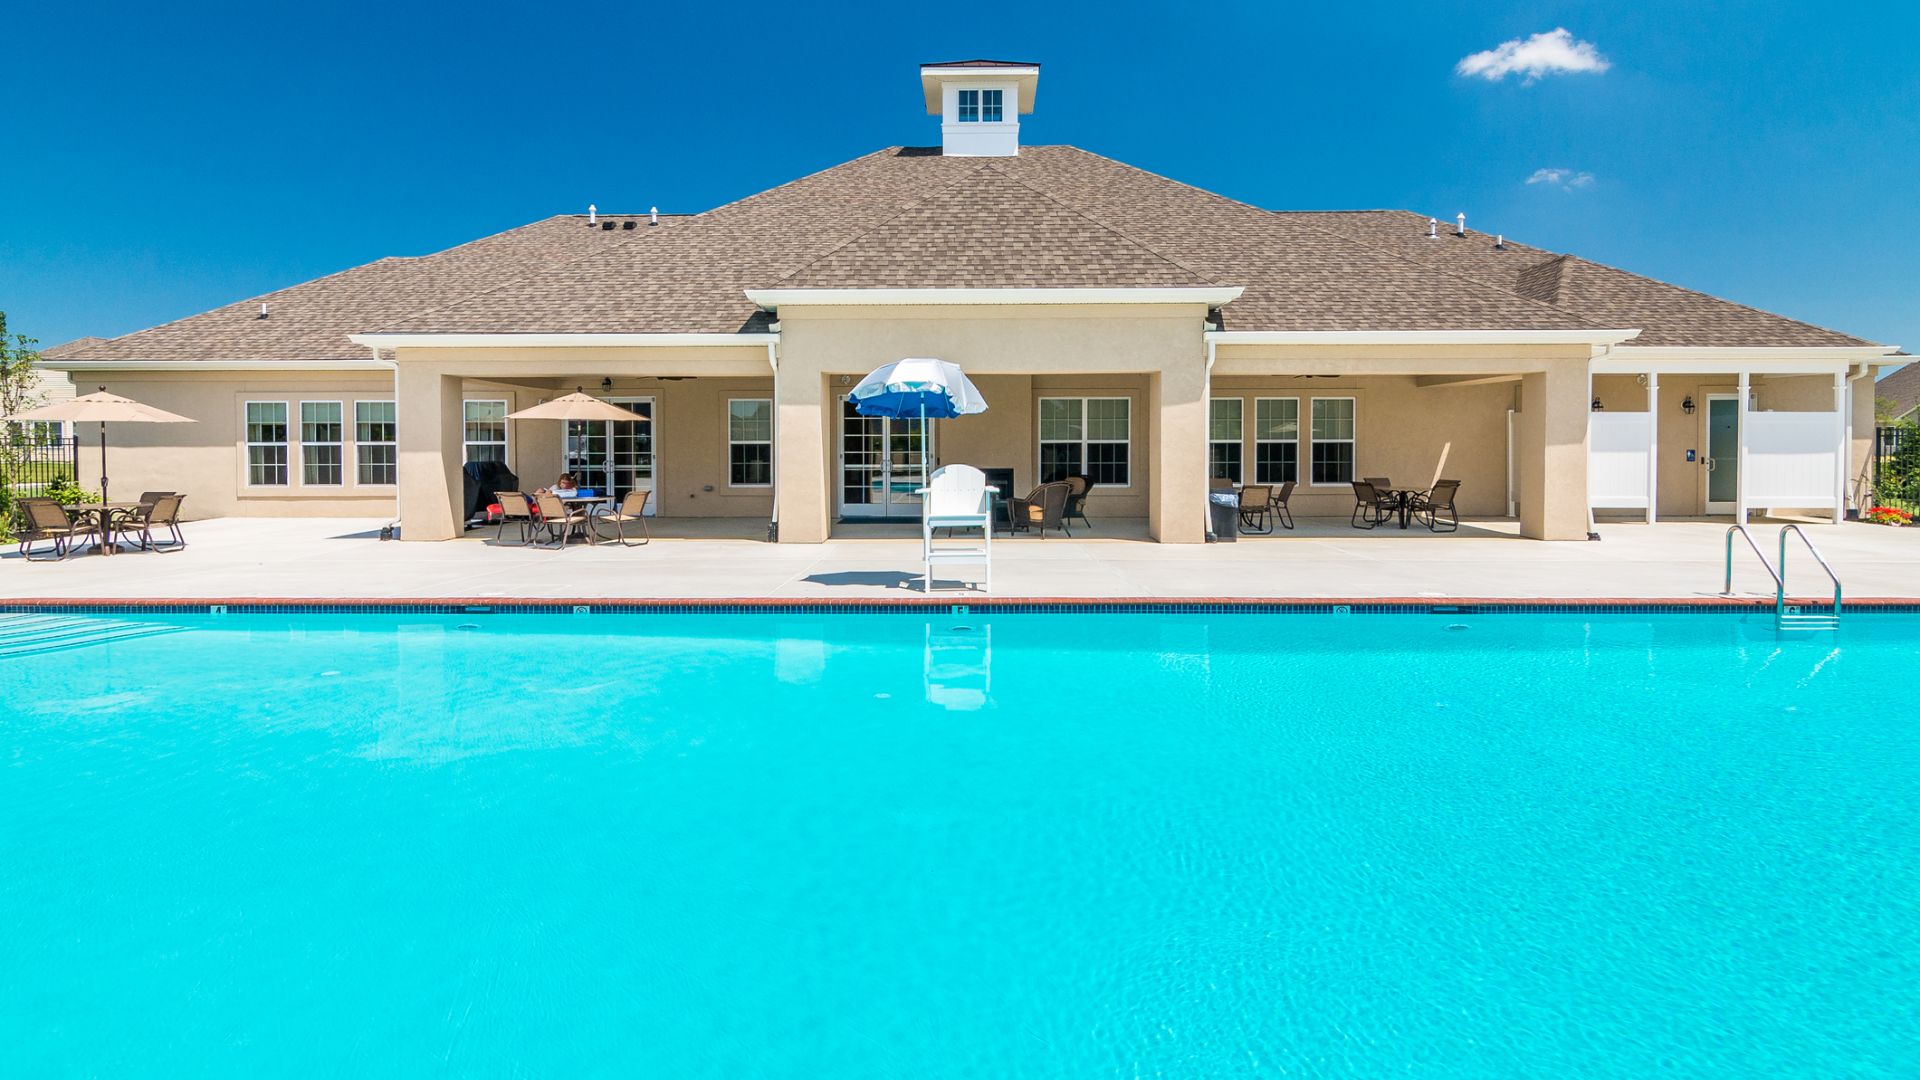 hoa pool with pool accessories